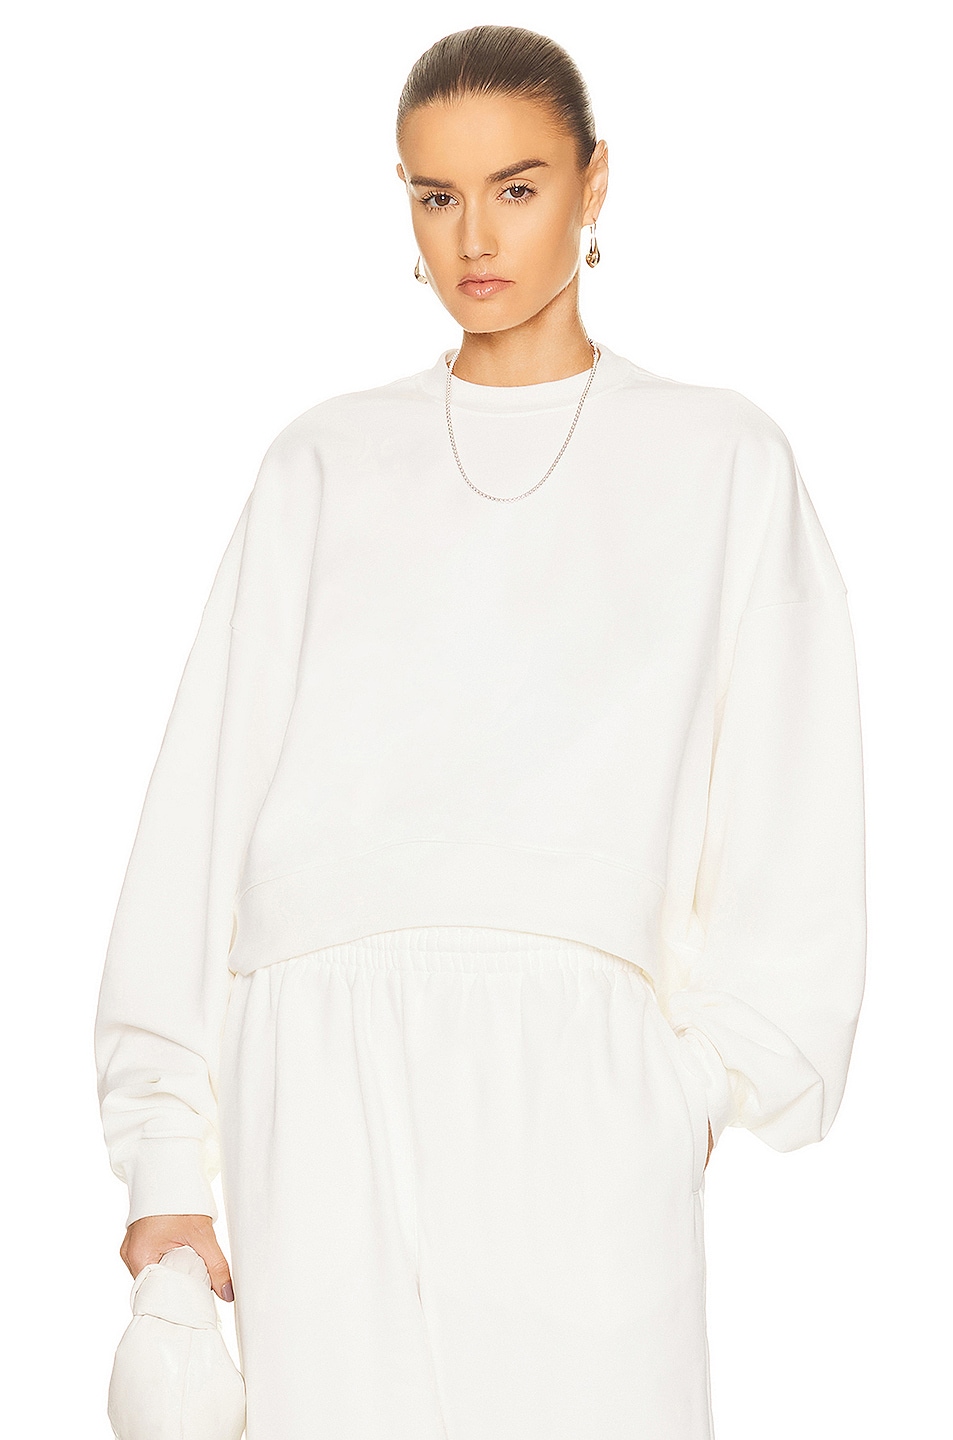 x Hailey Bieber HB Track Top in White